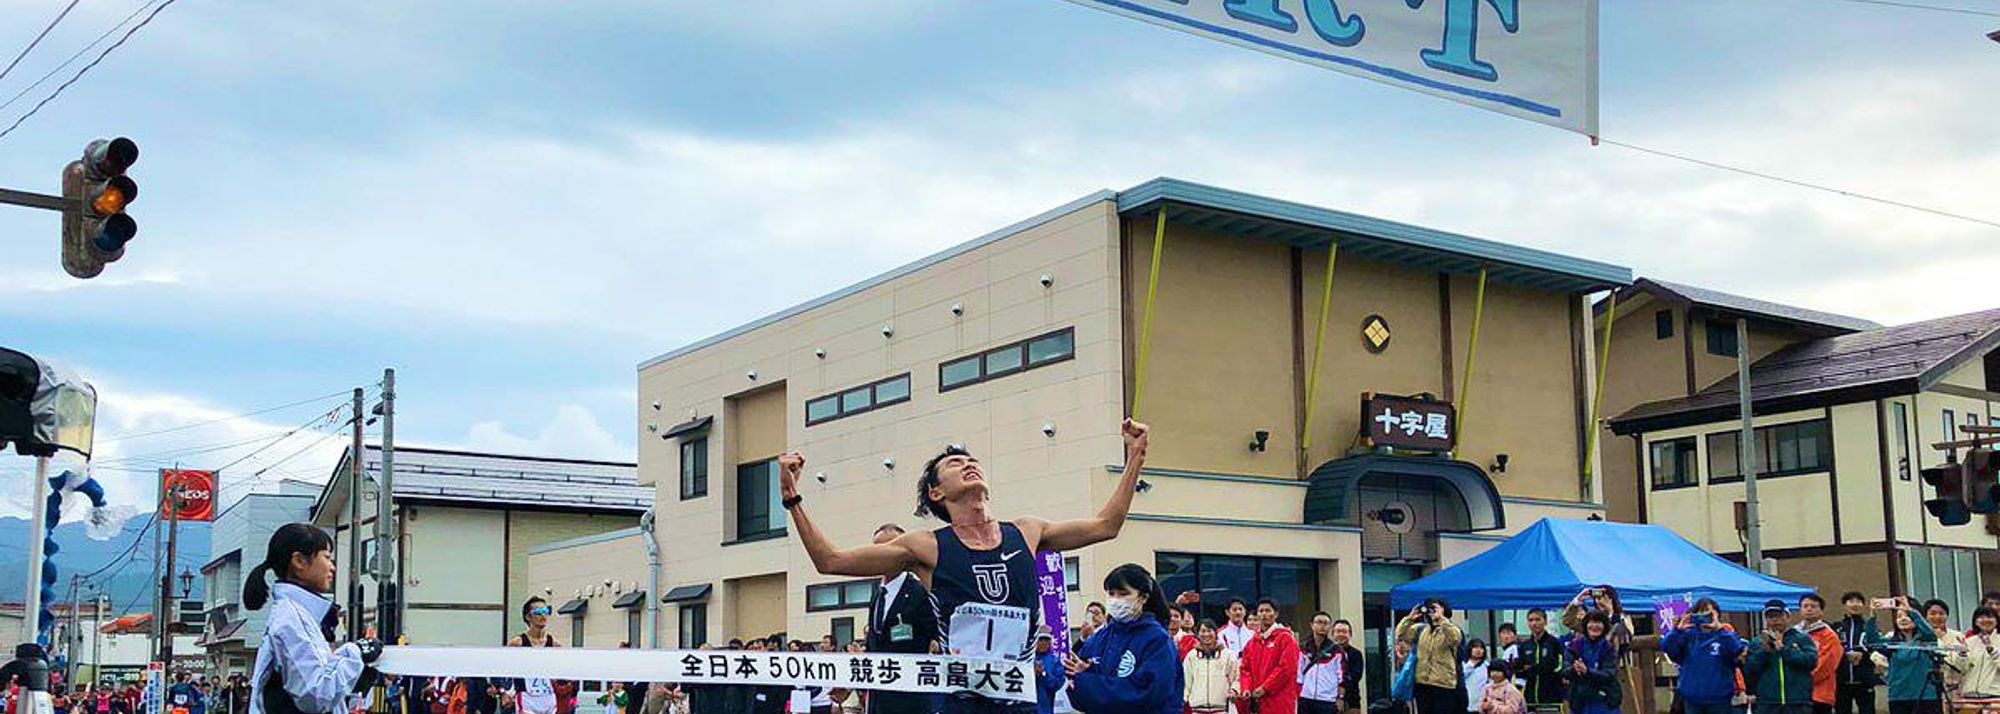 Masatora Kawano booked his place on Japan’s 2020 Olympic team by winning the 50km race walk in Takahata in a national record of 3:36:45 on Sunday (27).